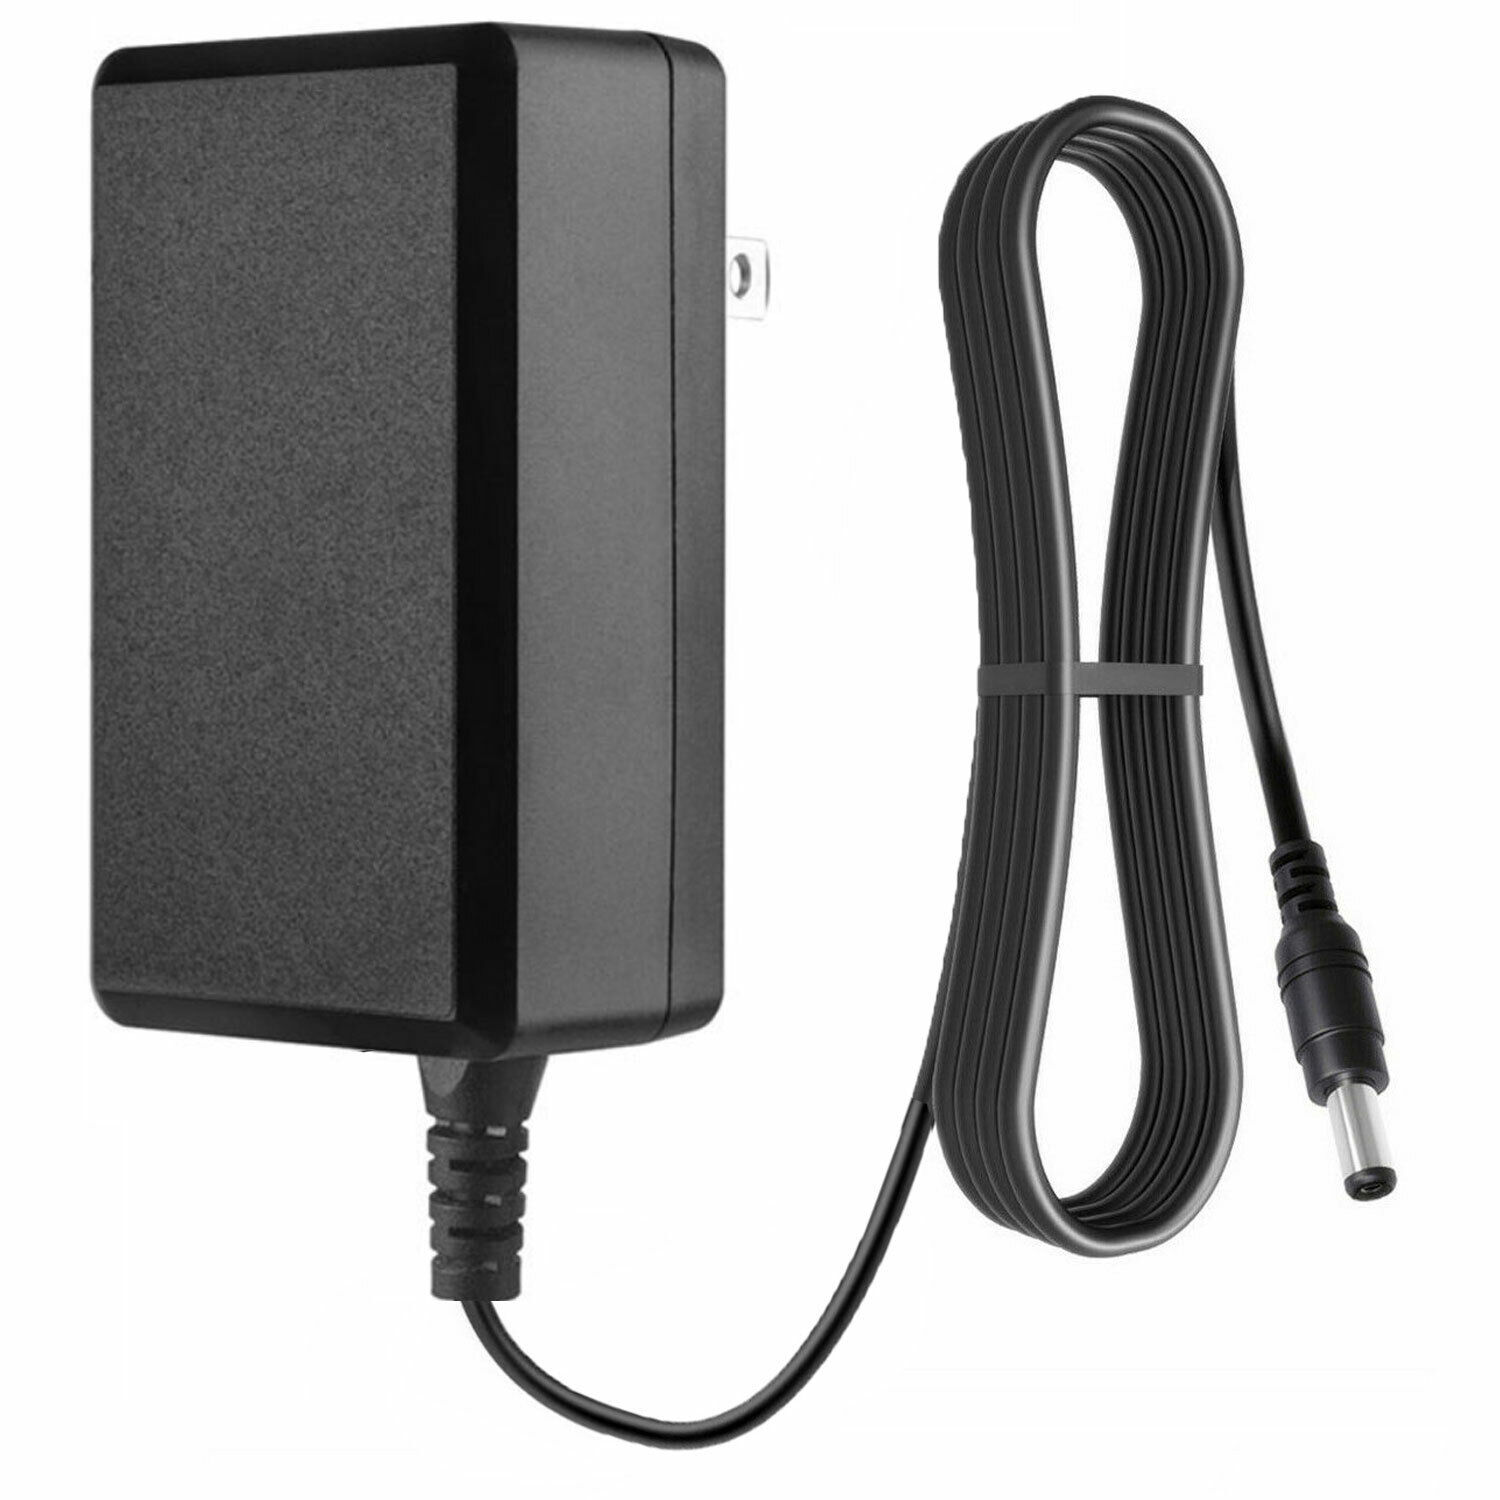 AC DC Adapter For Oxy go Next Concentrator Power Supply Charger Mains Cord PSU Type: AC/DC Adapter Features: Powere